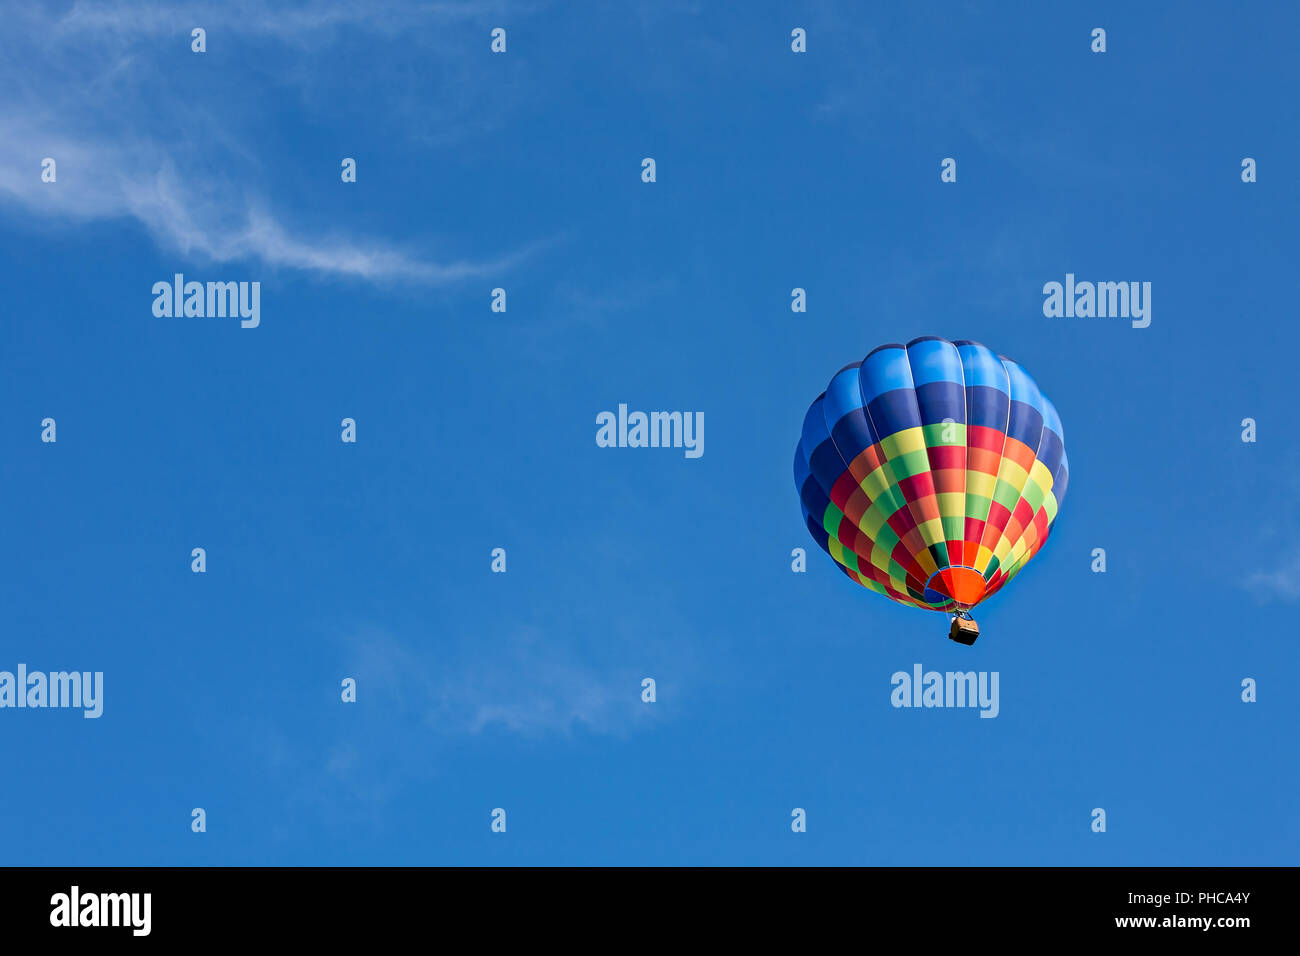 Colorful hot-air balloon in flight Stock Photo